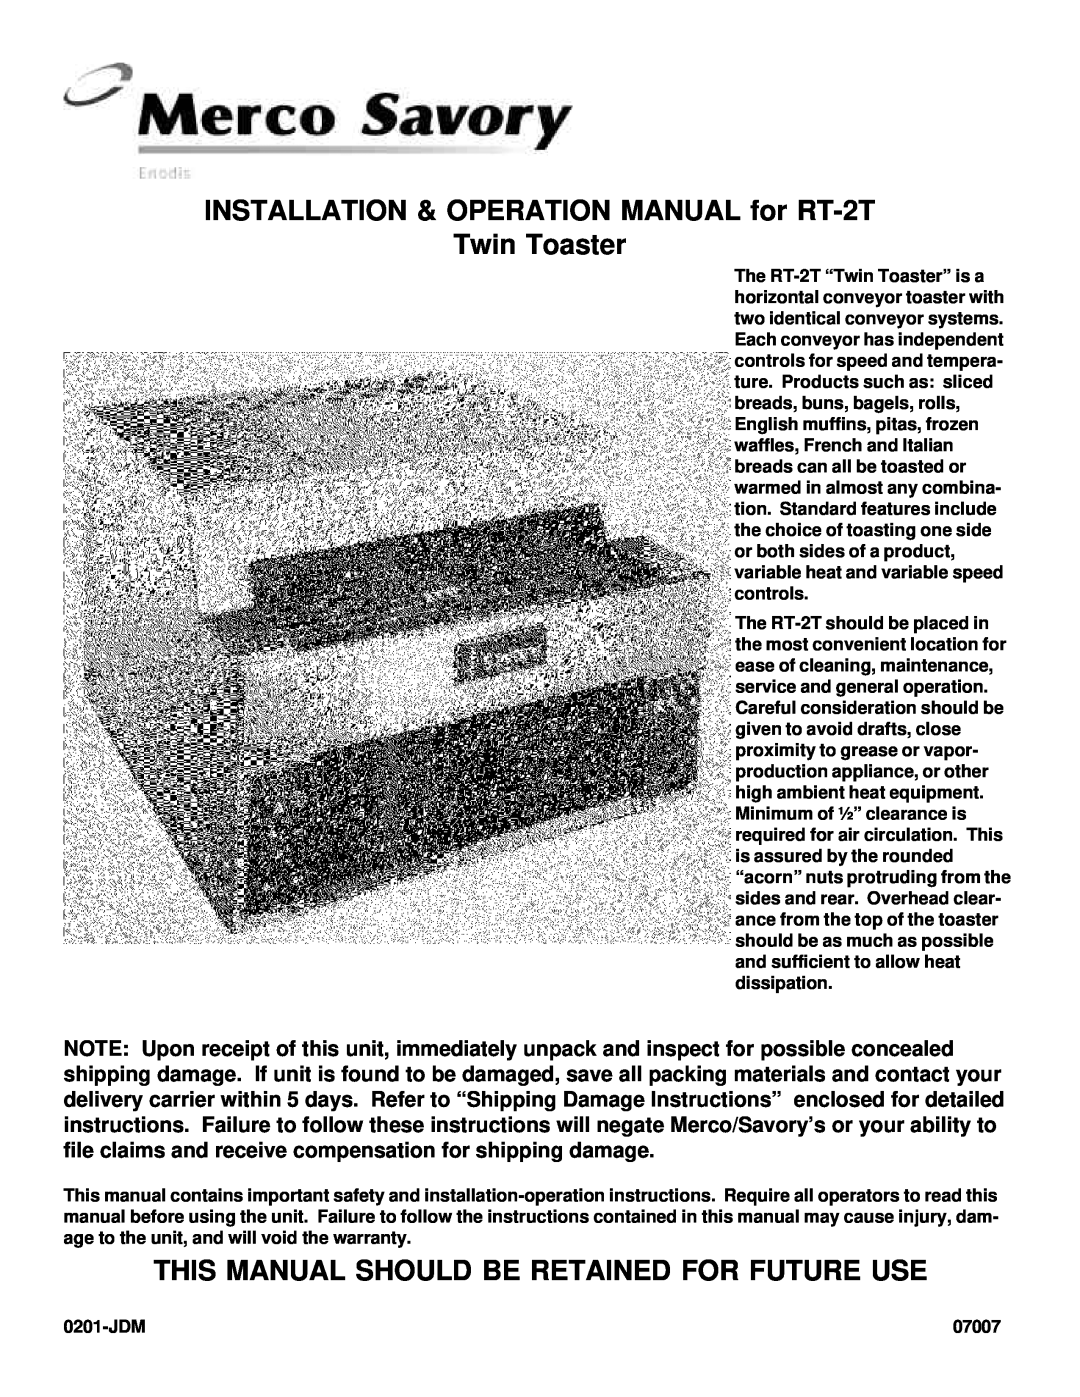 Merco Savory RT-2T operation manual This Manual Should Be Retained For Future Use, 0201-JDM, 07007 